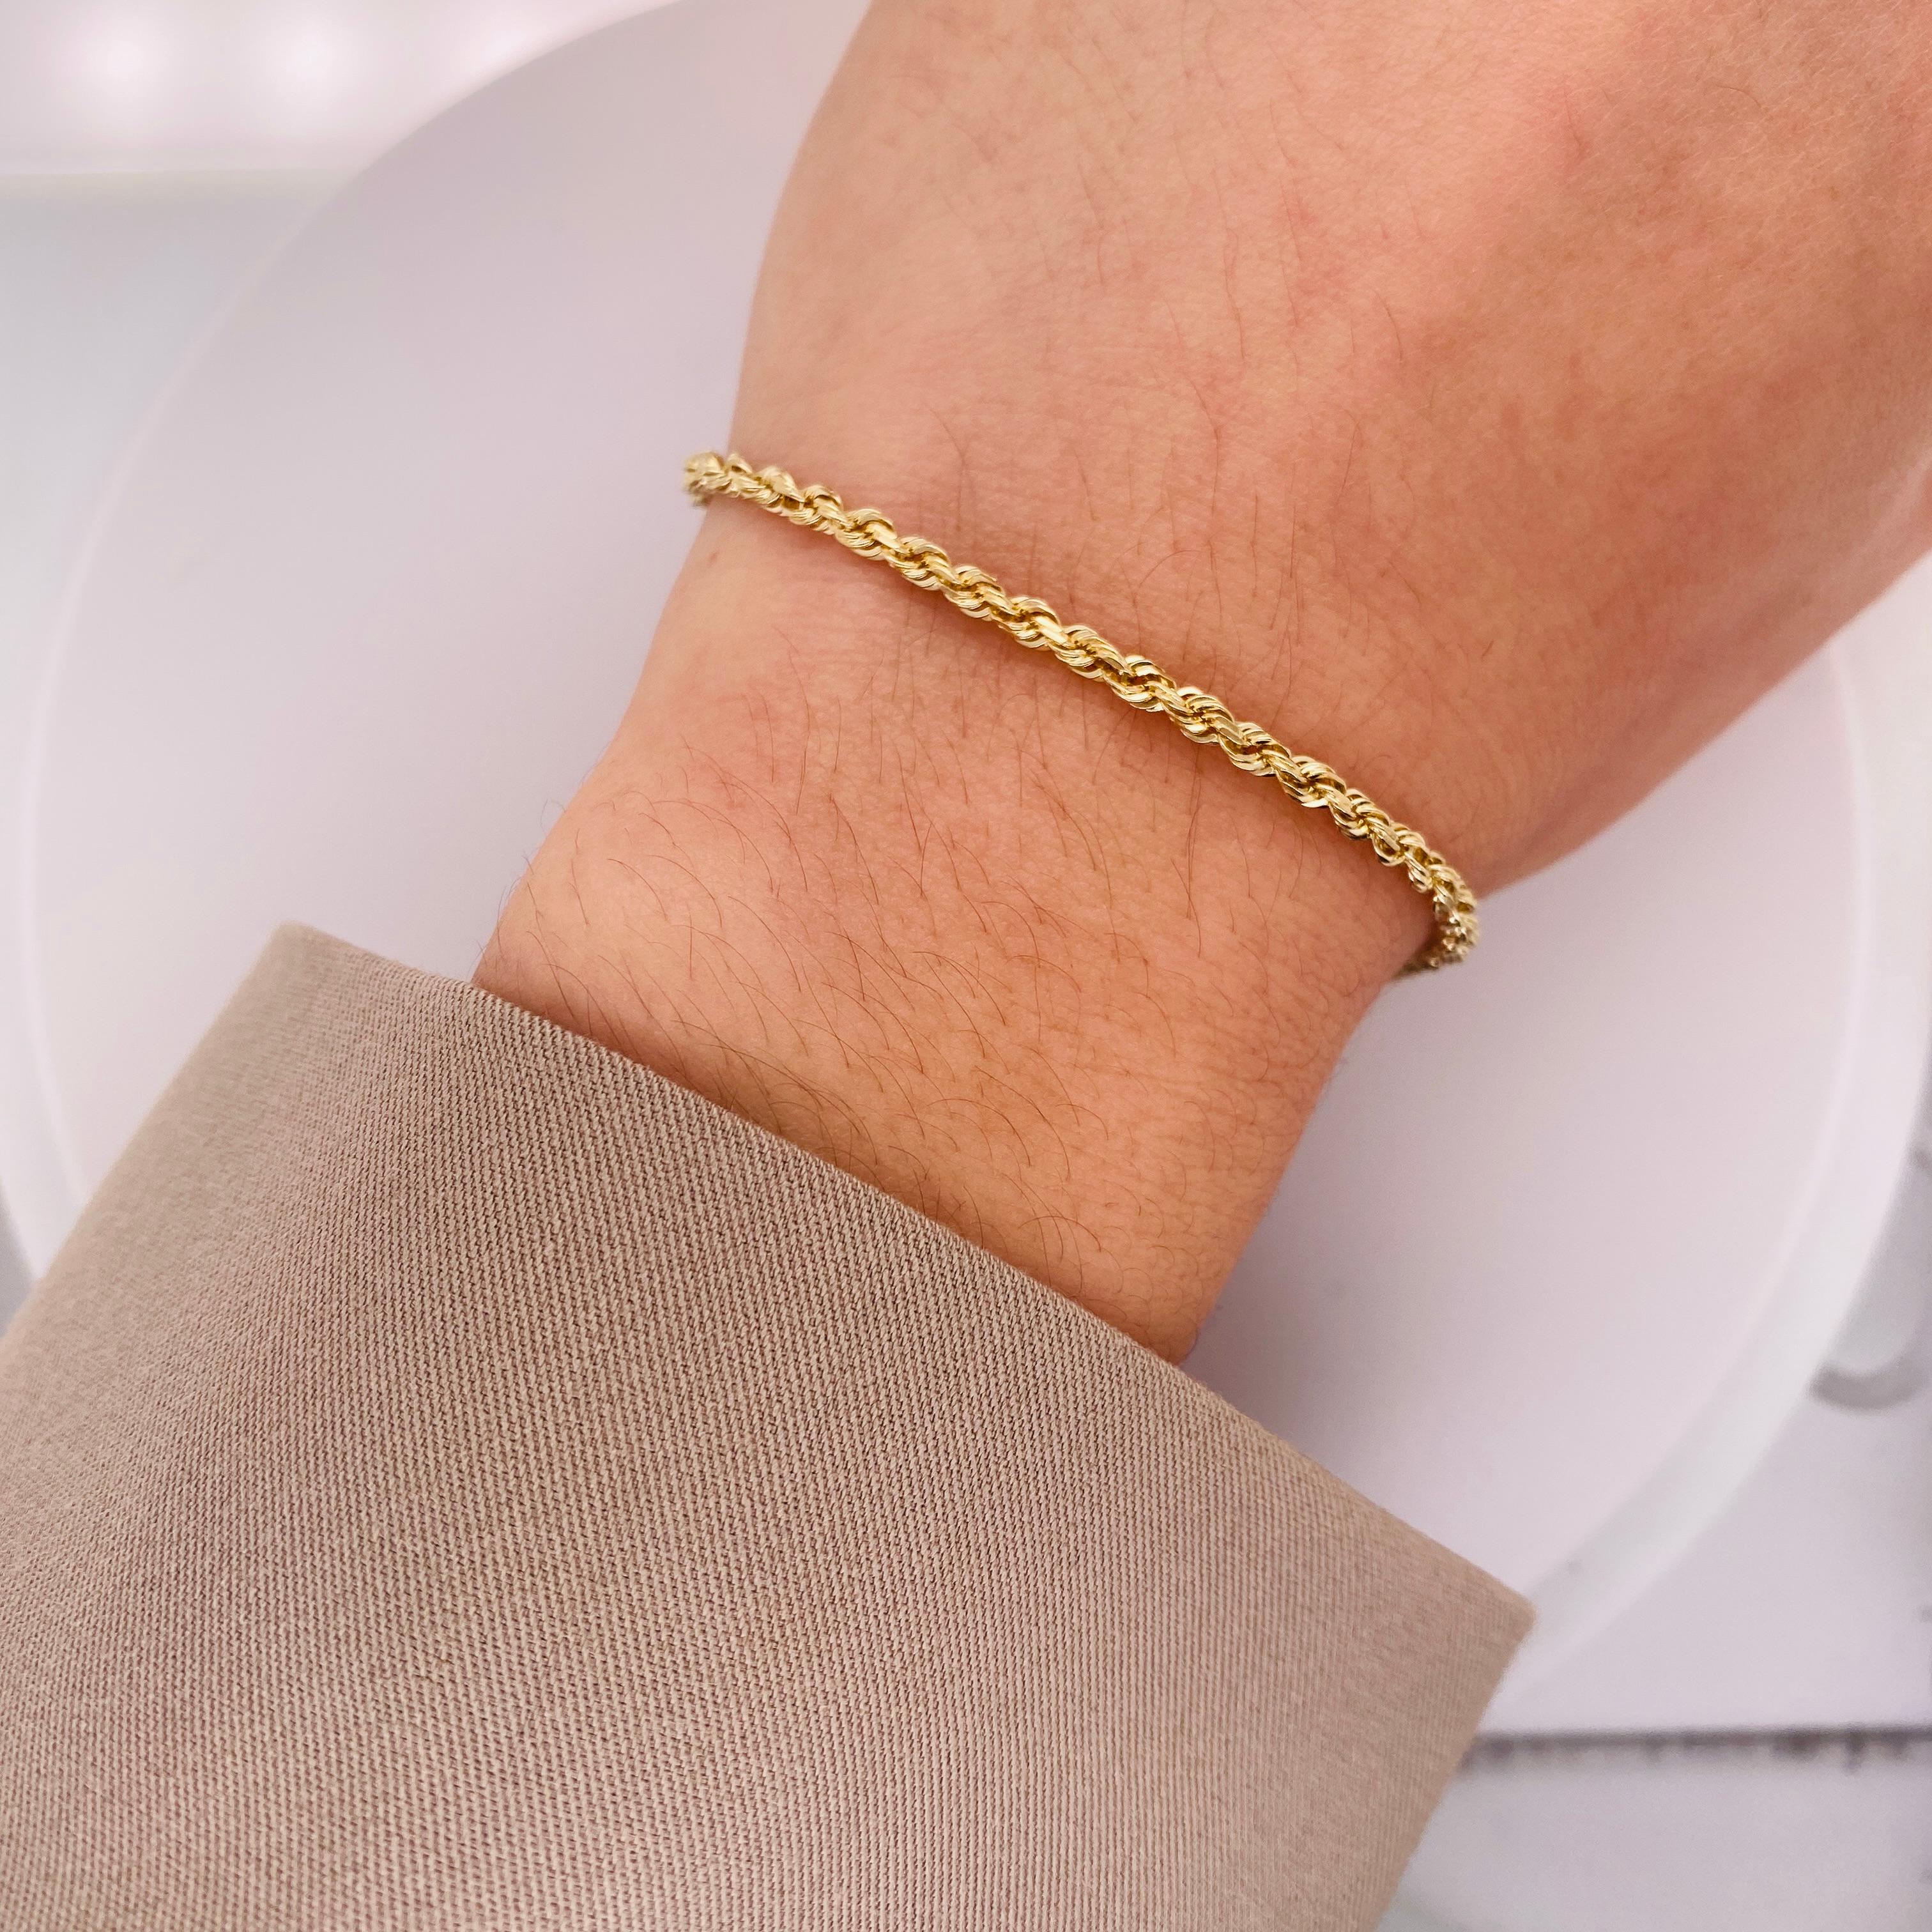 This charming bracelet would make a perfect gift for your loved one or yourself! Beautifully slender and comfortable, this rope chain bracelet is the perfect addition to any jewelry collection! The sleek rounded and twisting shape creates a perfect